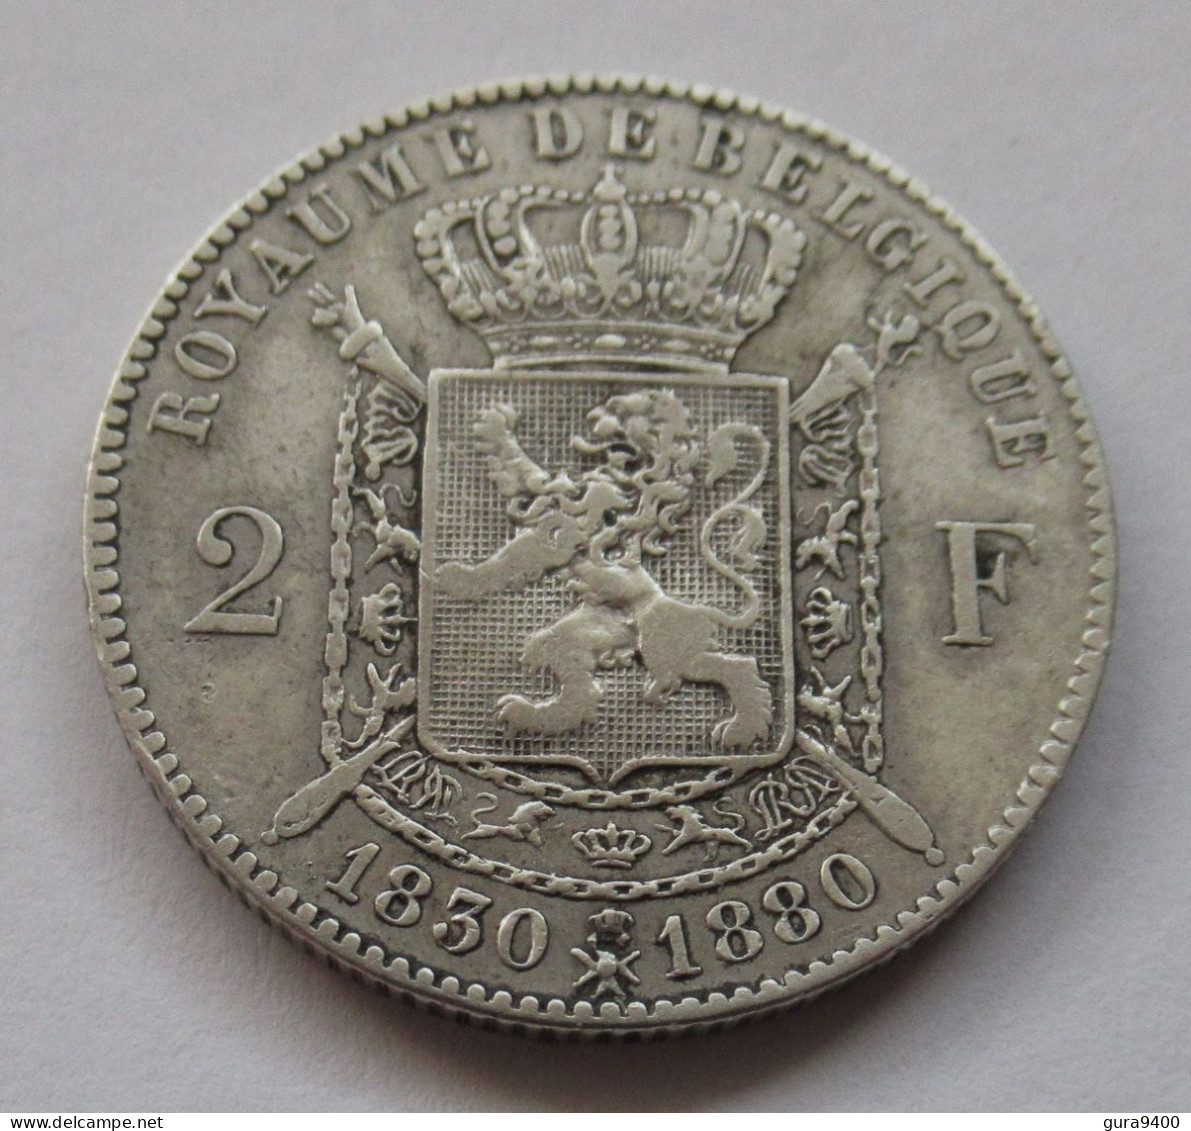 Belgie 2 Franc, 1880 50th Anniversary Of Independence - 2 Frank